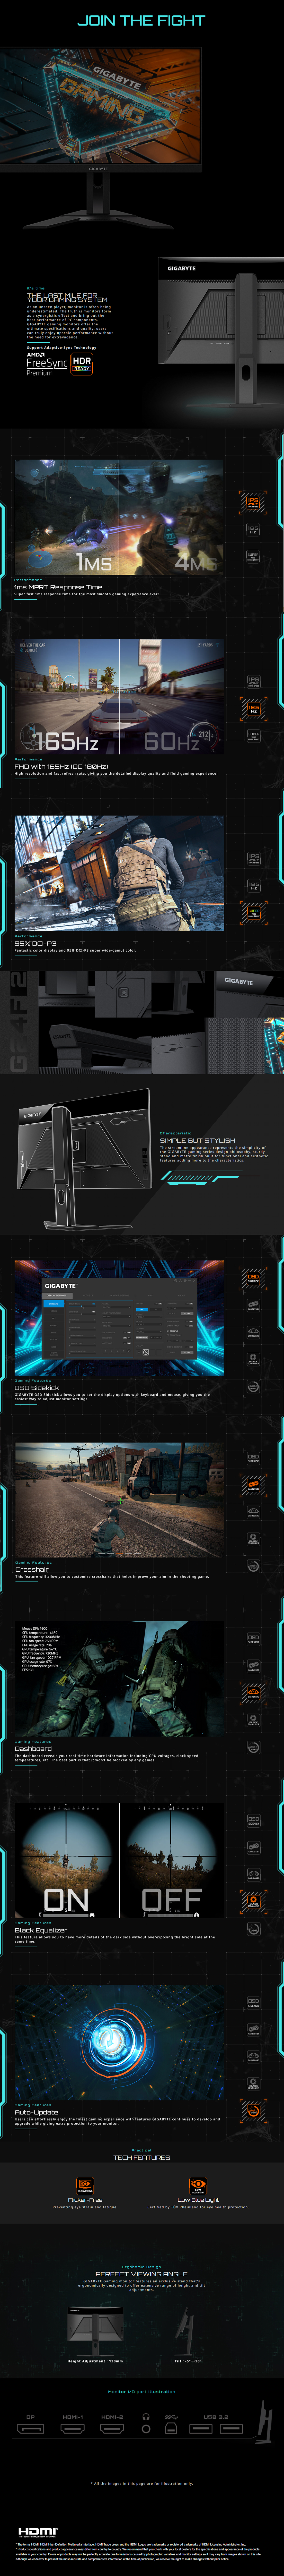 A large marketing image providing additional information about the product Gigabyte G24F-2 23.8" 1080p 180Hz IPS Monitor - Additional alt info not provided